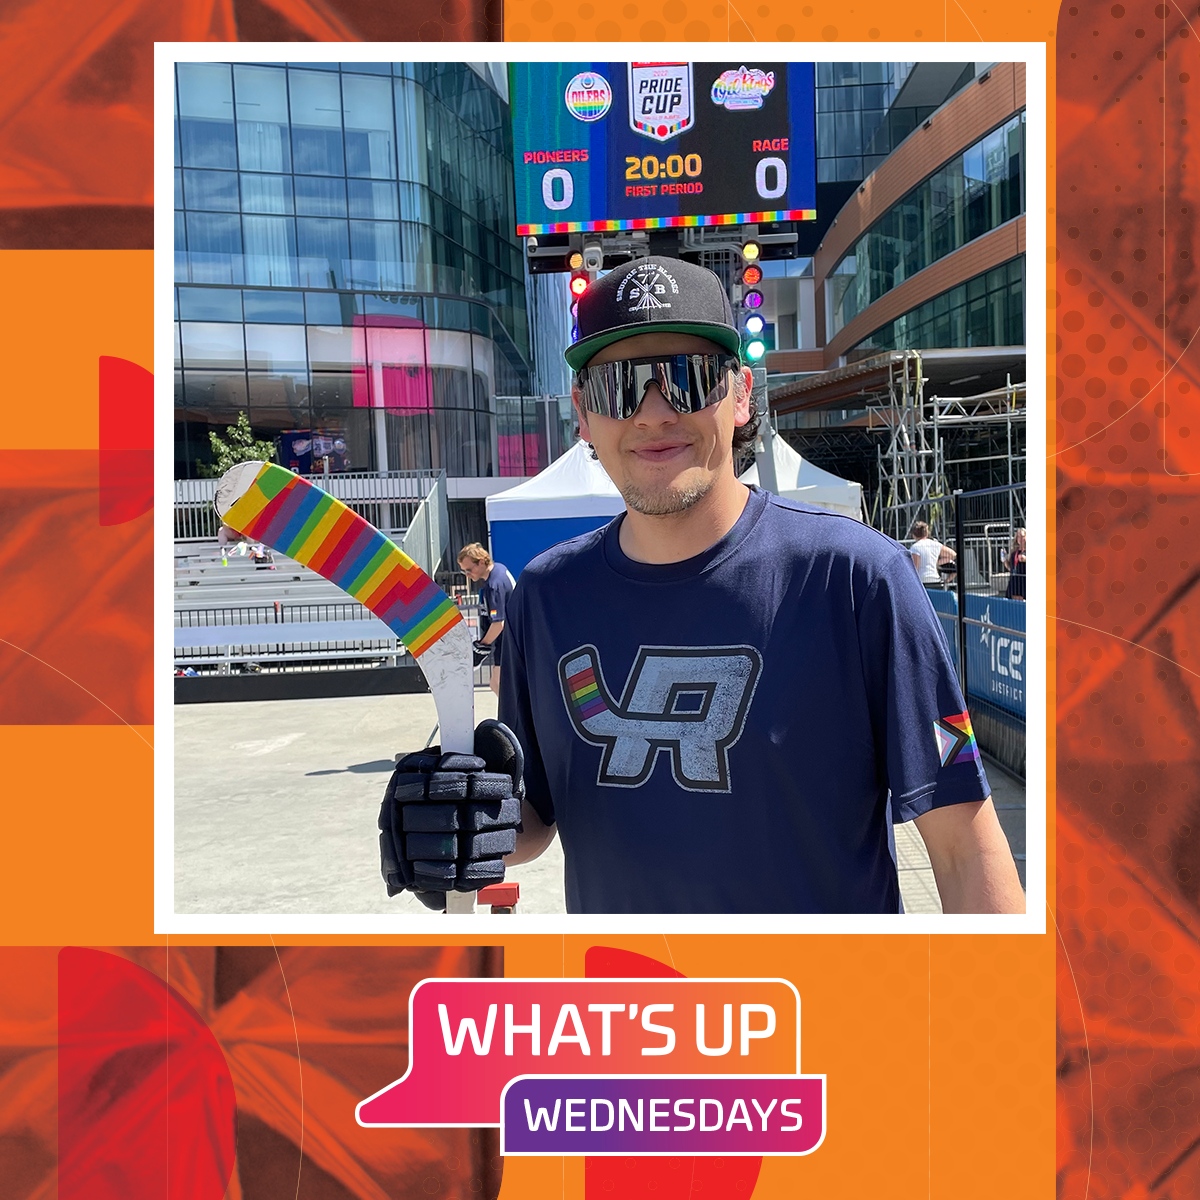 🏒🏳️‍🌈 EVENT DAY!! 🏒🏳️‍🌈

#WhatsUpWednesday returns TODAY in support of Pride Cup!
⁠
Bring your stick down to Ford Hall from 12-1PM and meet @EdmontonOilers alum Ladislav Smid will tape it up with @PrideTape and then take a photo with the Pride Cup!!